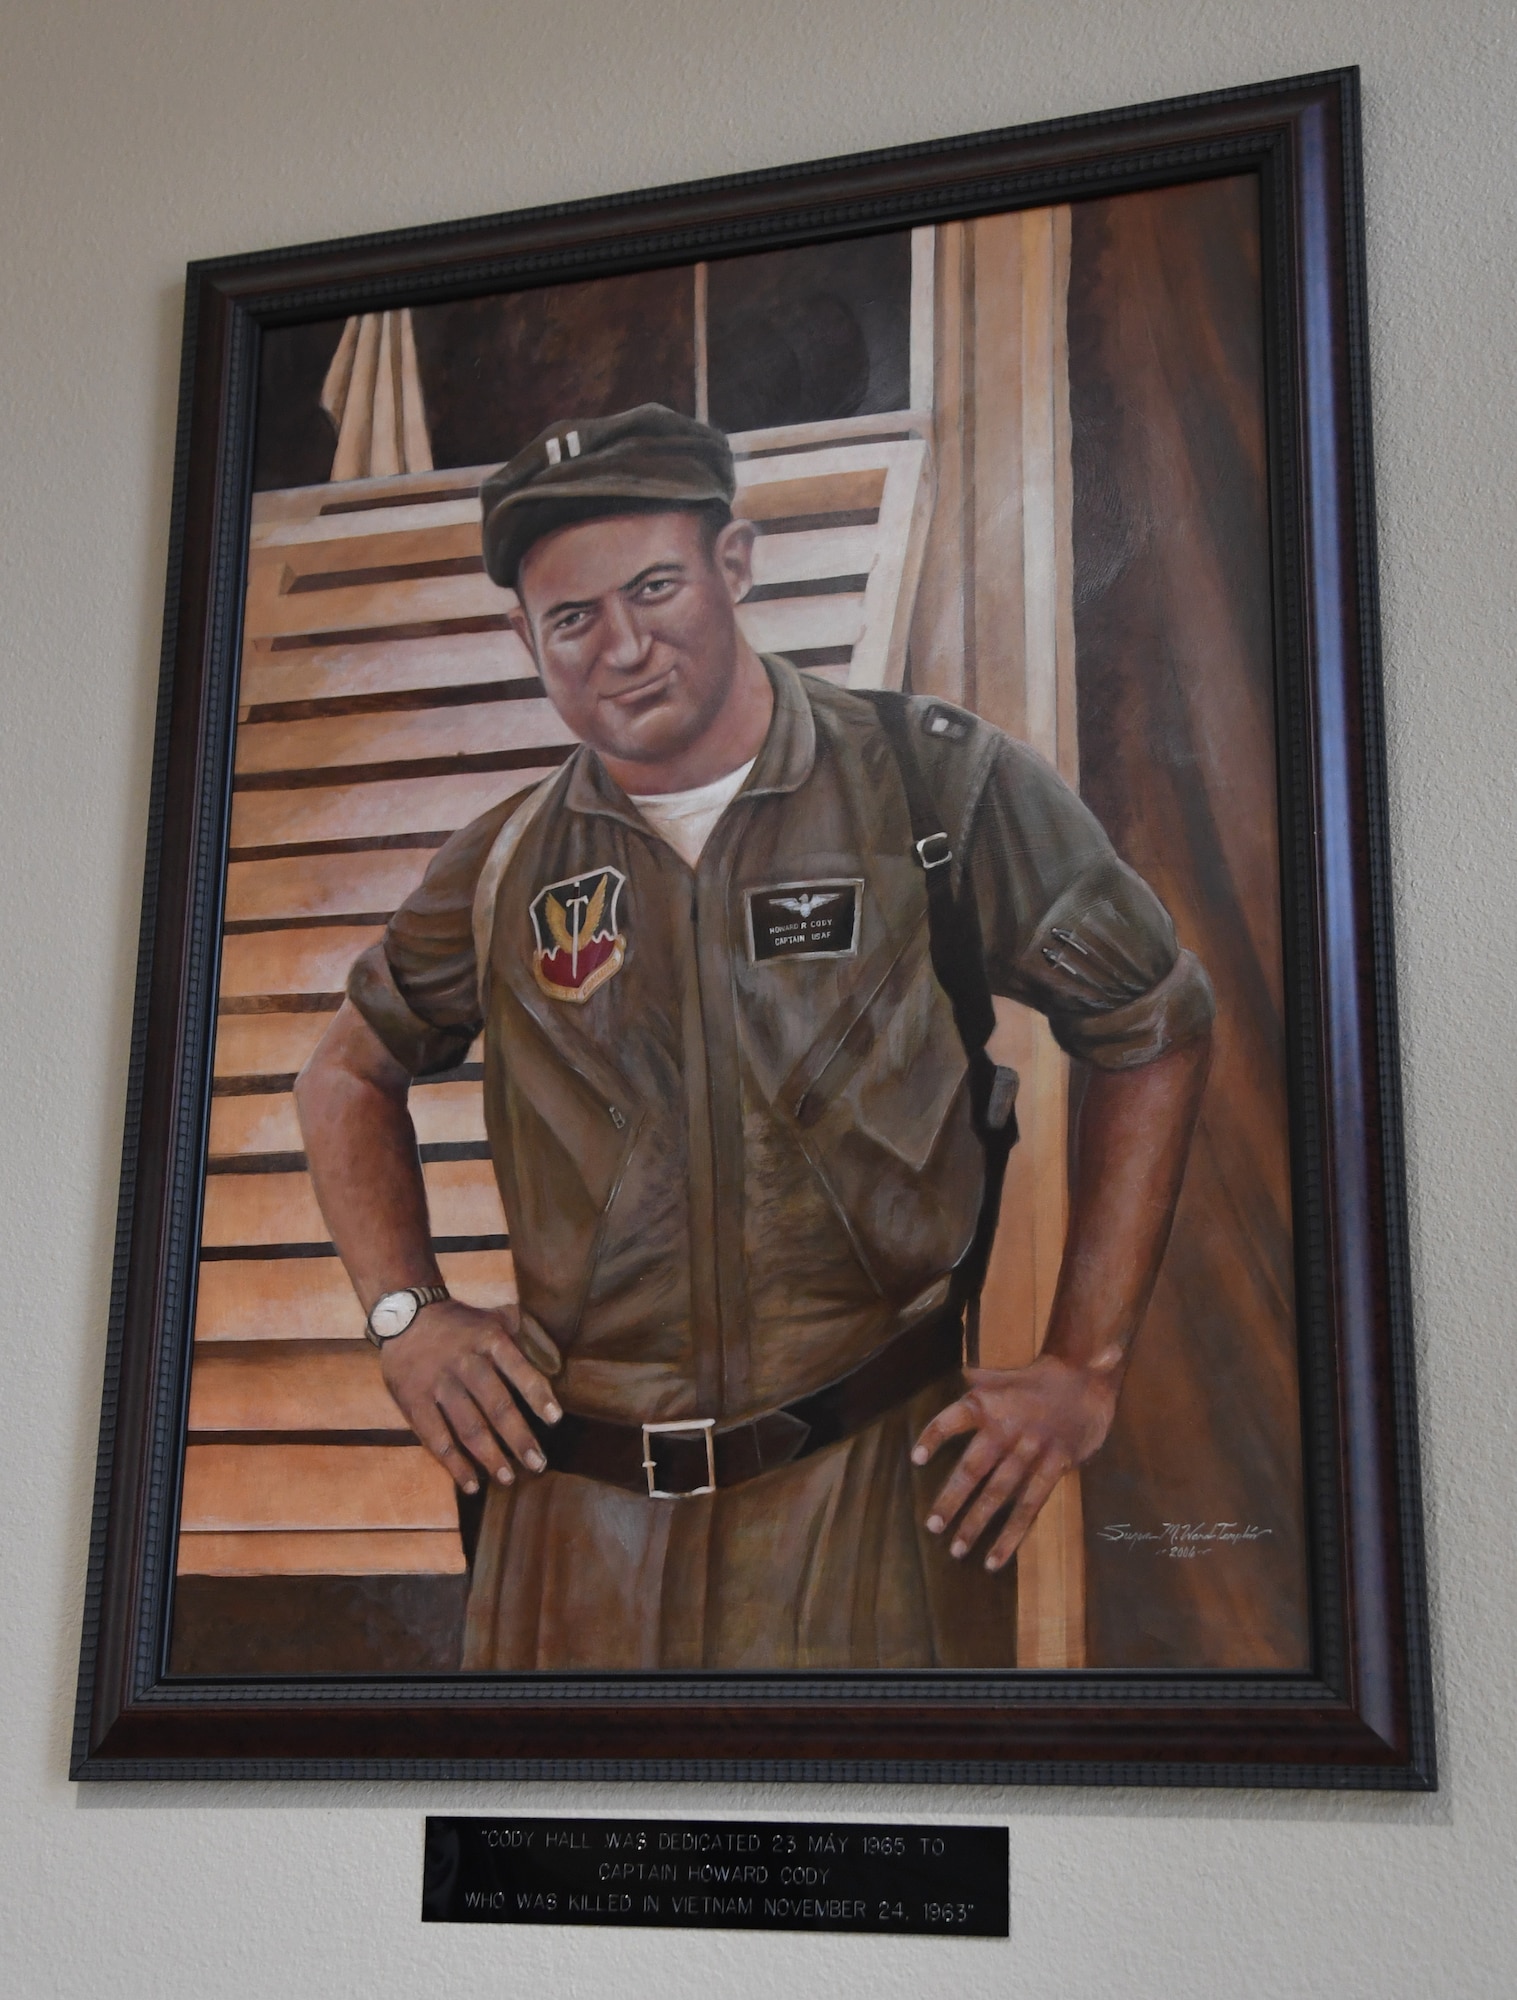 A painting of U.S. Air Force Capt. Howard Cody is on display inside Cody Hall at Keesler Air Force Base, Mississippi, Sept. 2, 2020. Cody was a senior pilot who was killed in action in South Vietnam in 1963. (U.S. Air Force photo by Kemberly Groue)